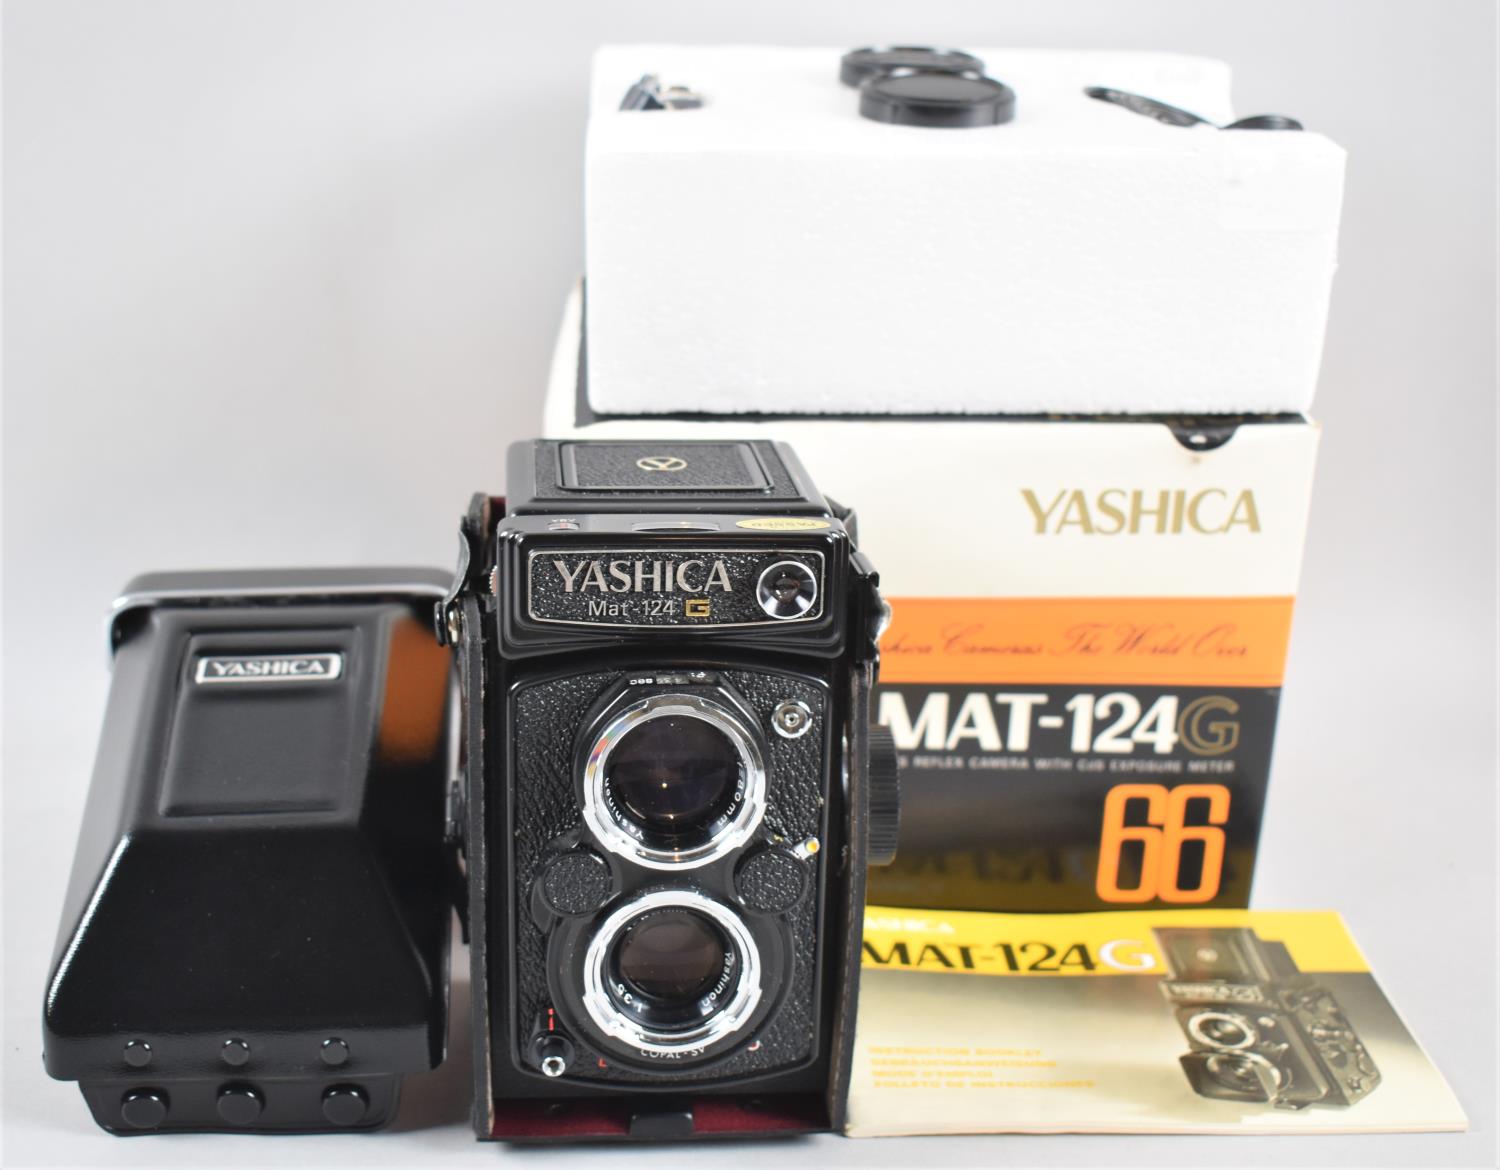 A New and Unused Boxed Yashica Mat-124G Twin Lens Reflex Camera with CDF Exposure Meter